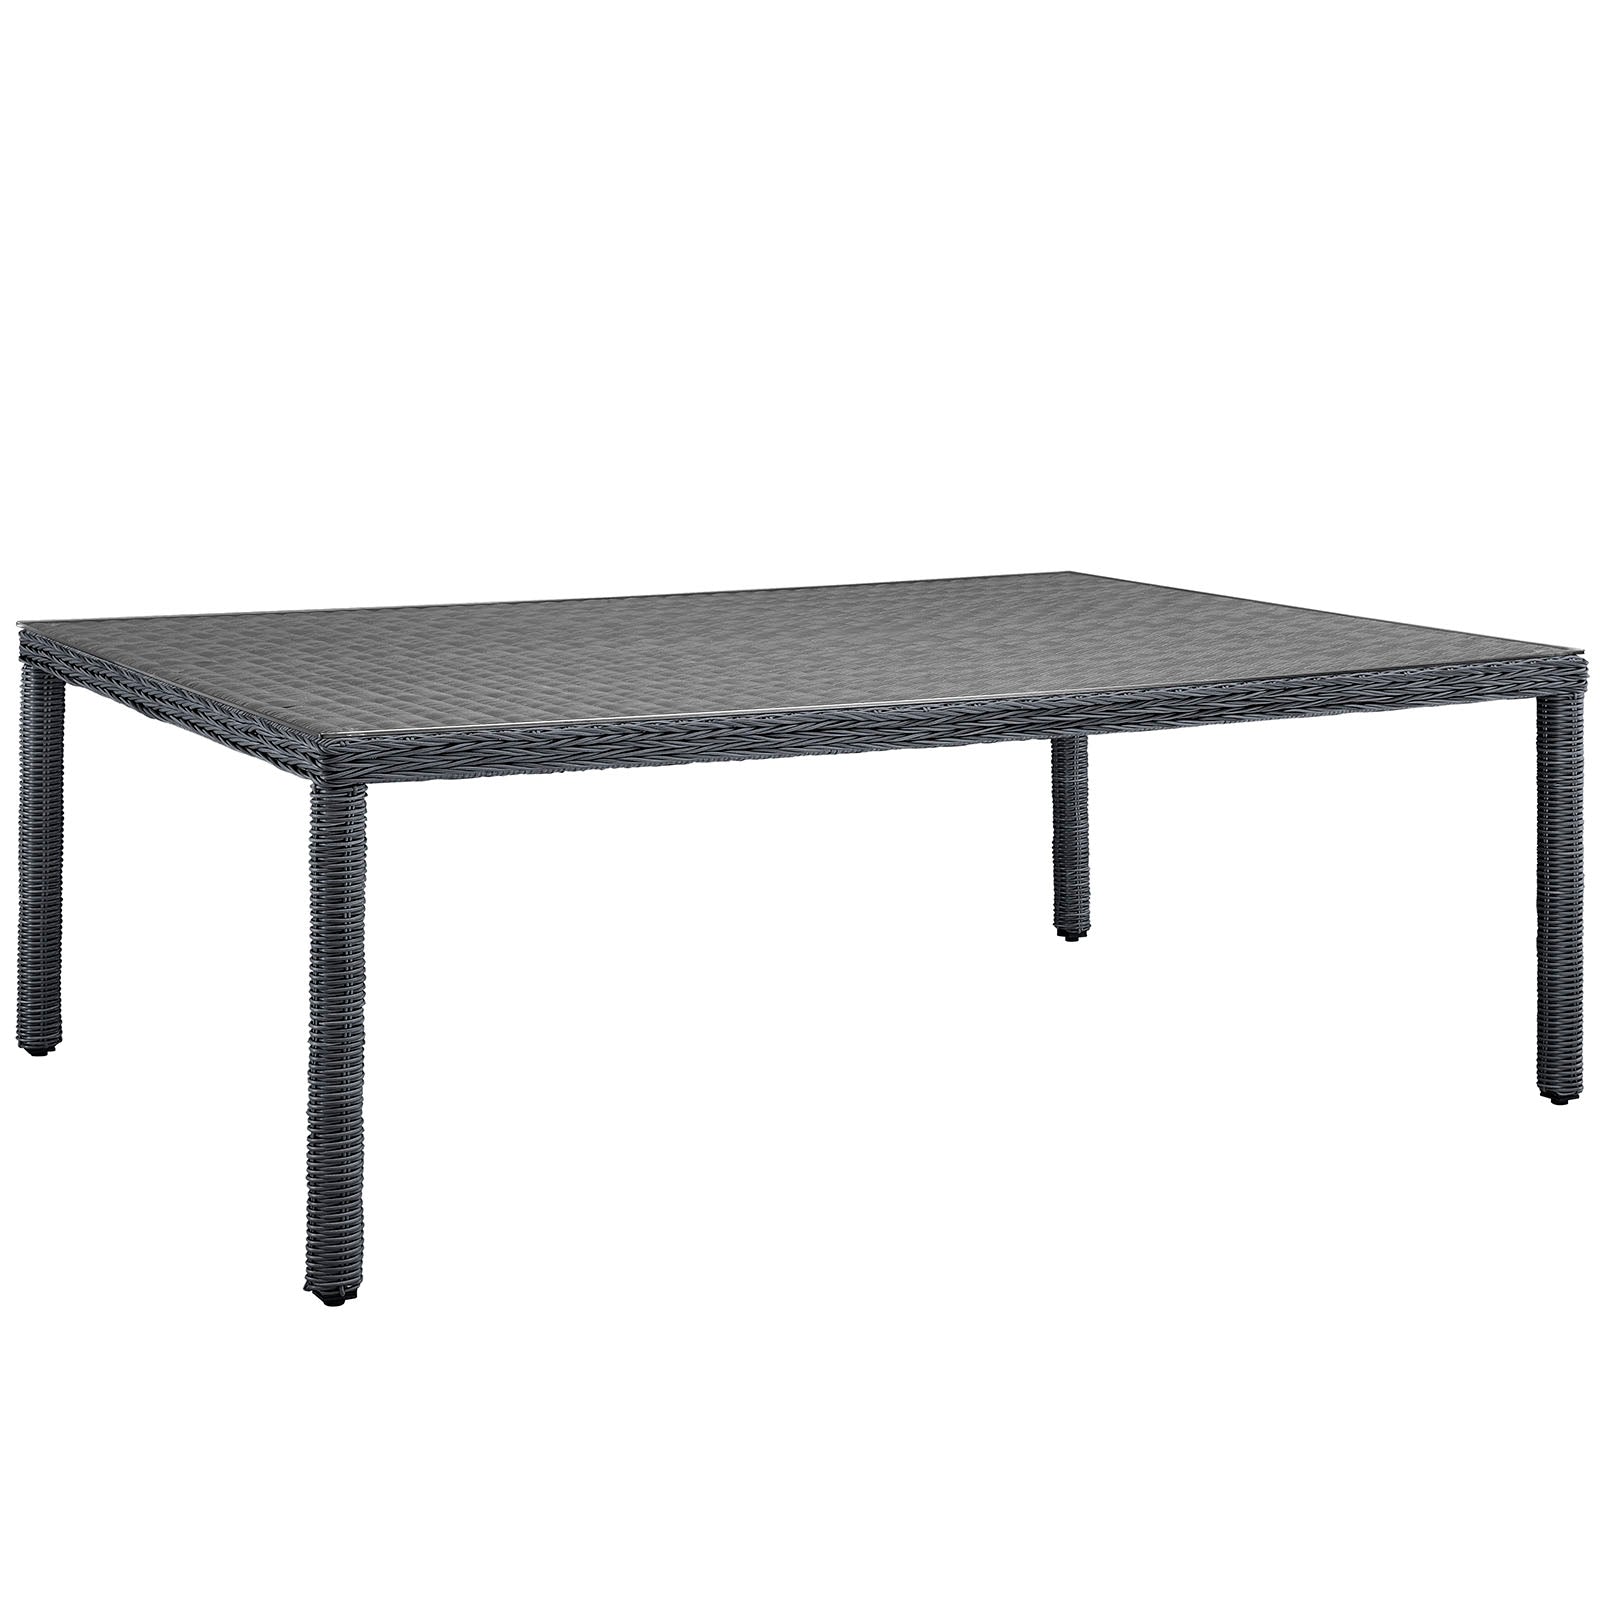 Summon 90" Outdoor Patio Dining Table - East Shore Modern Home Furnishings